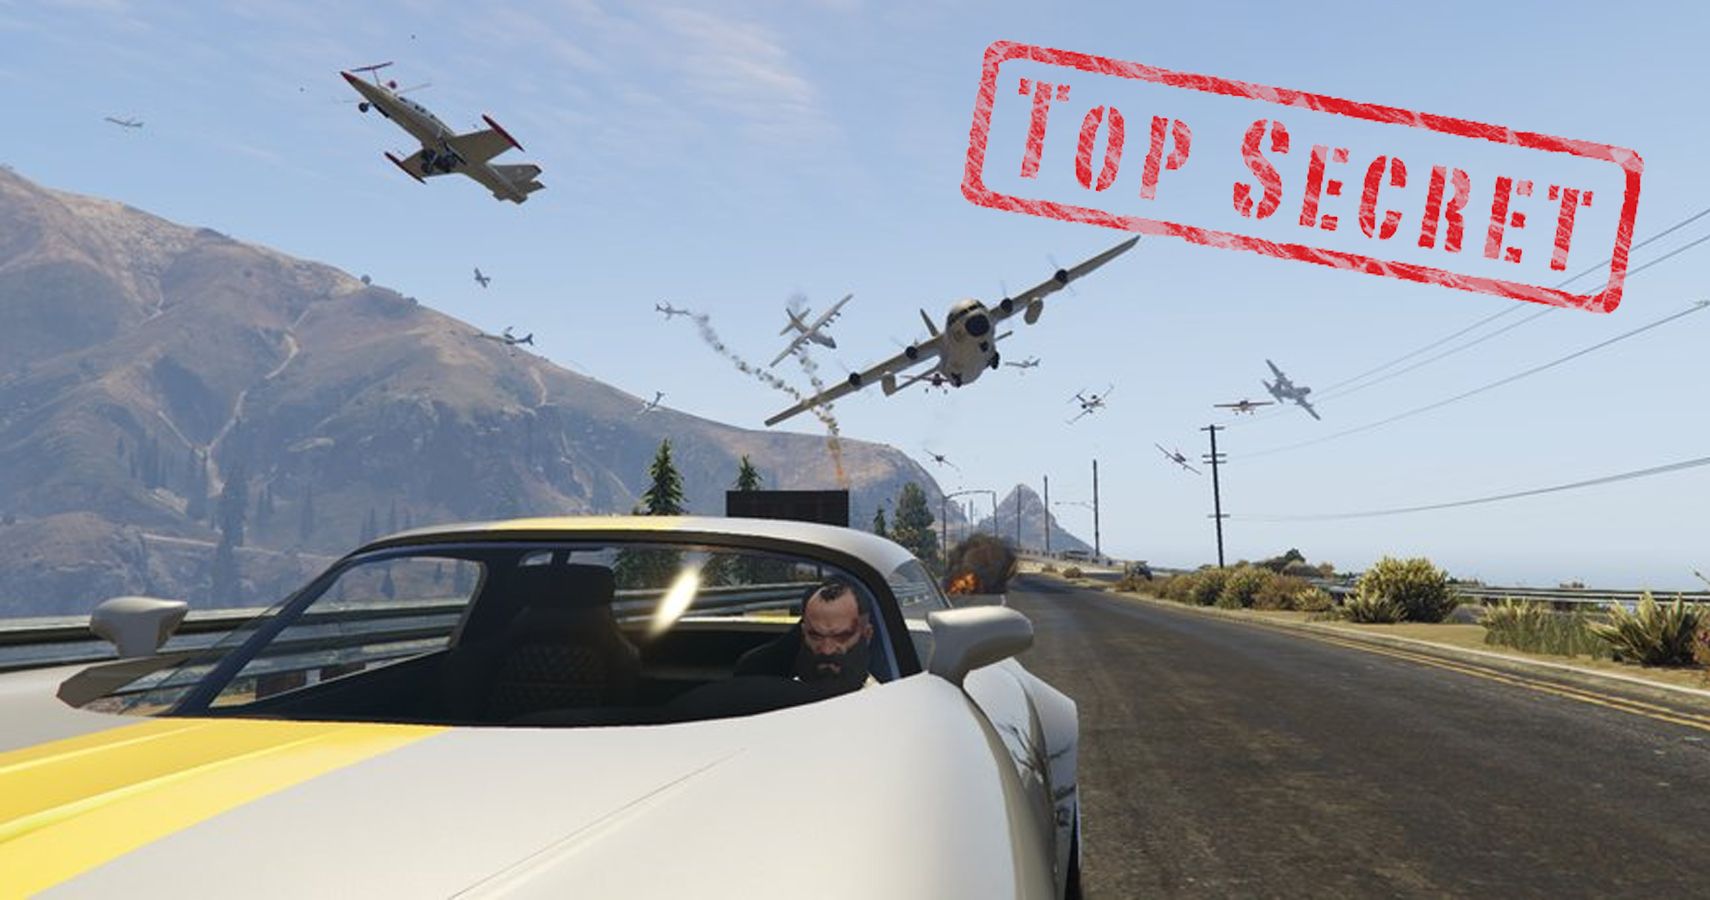 All Locations] GTA 5 All Helicopter Locations Online & Offline